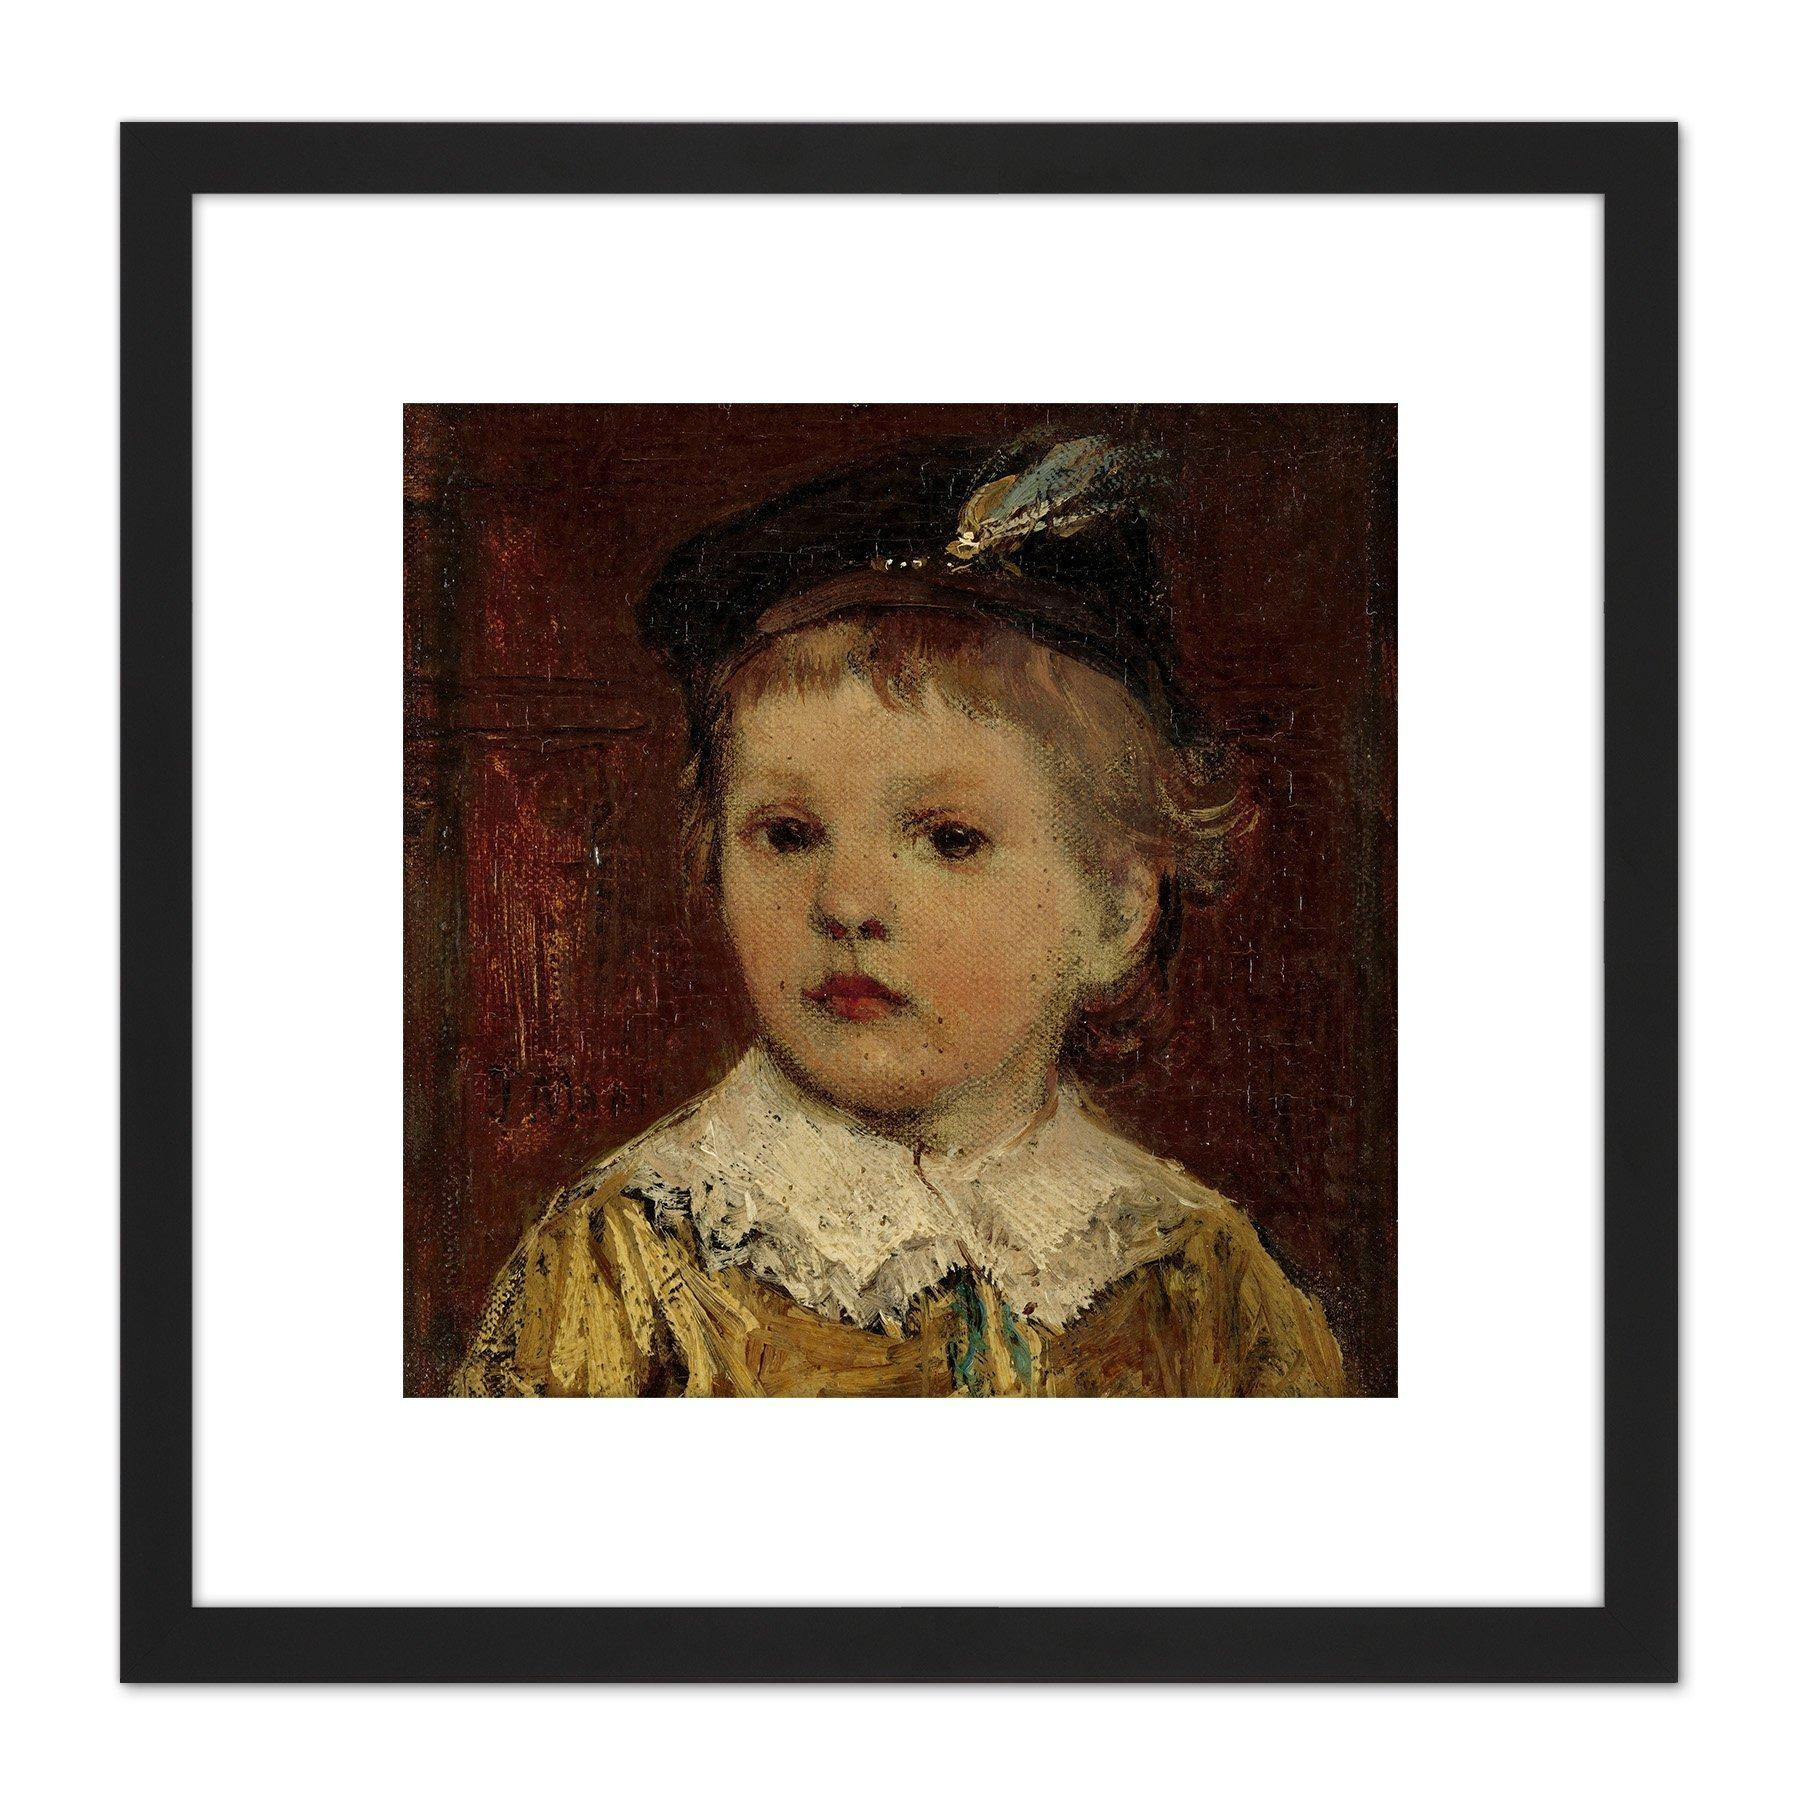 Maris Willem Matthijs Child Portrait Painting 8X8 Inch Square Wooden Framed Wall Art Print Picture with Mount - image 1